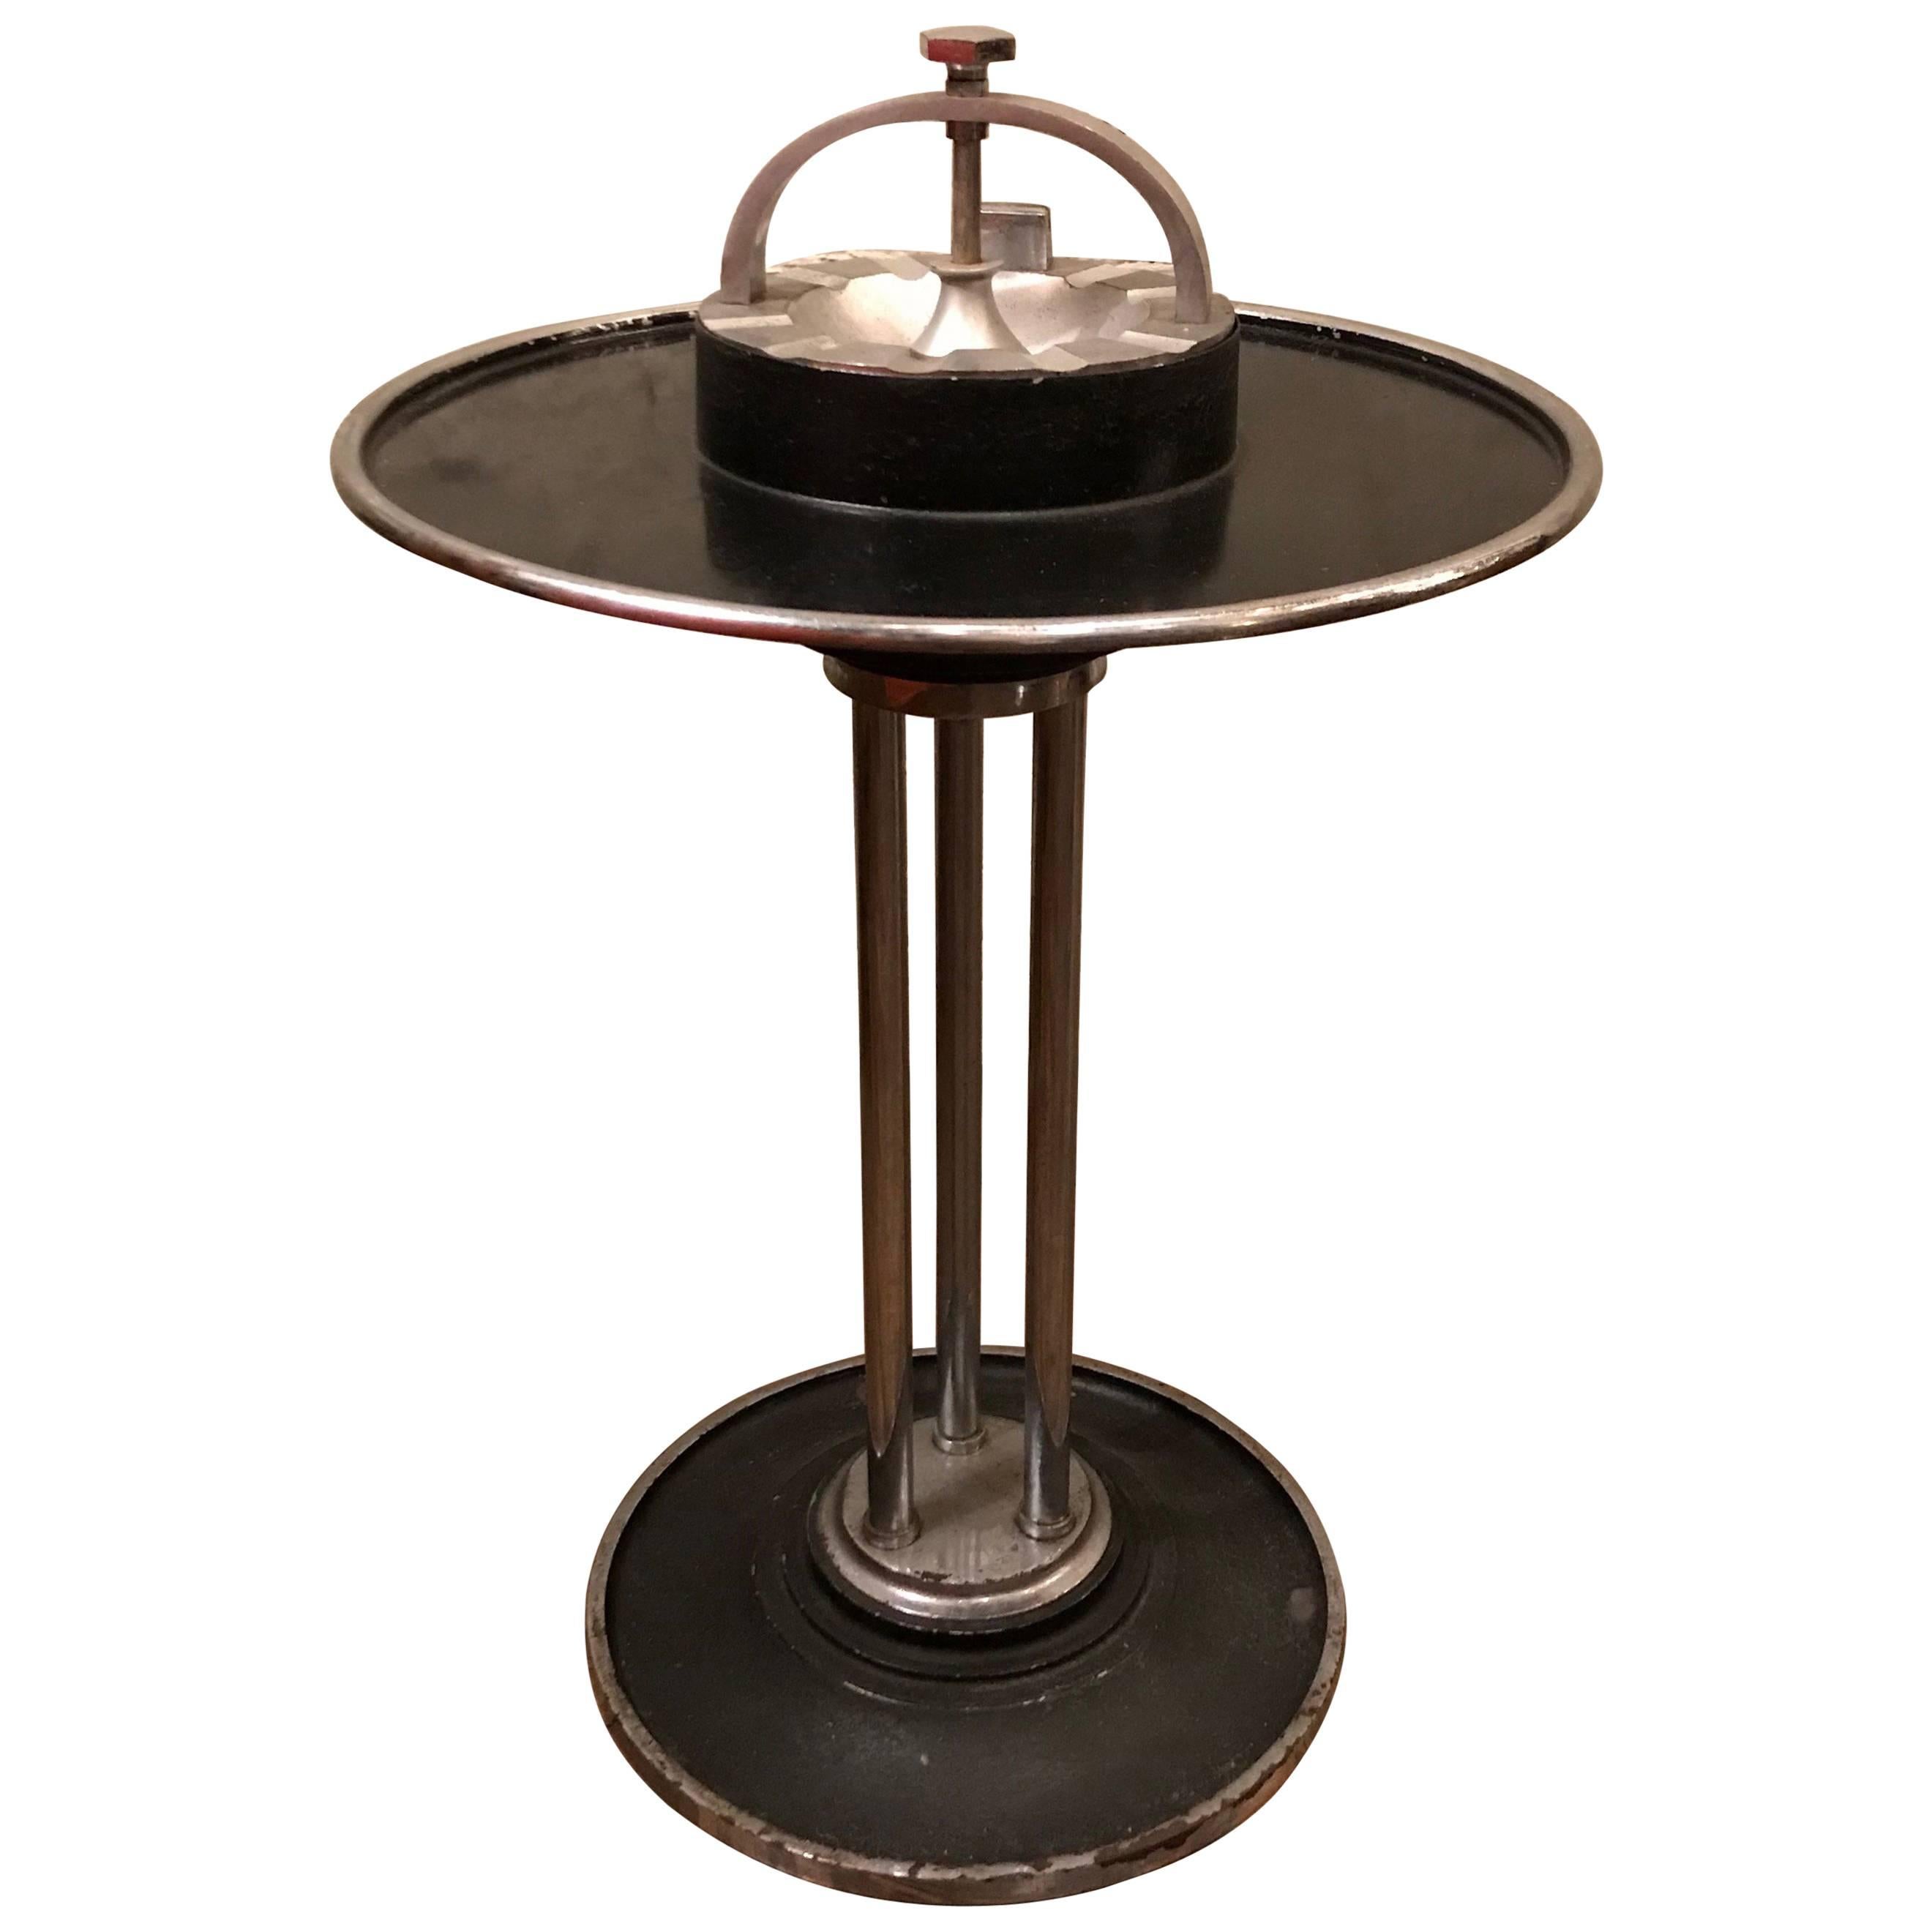 Climax Streamlined Art Deco Train Car Cocktail Smoker Stand Ashtray Side Table